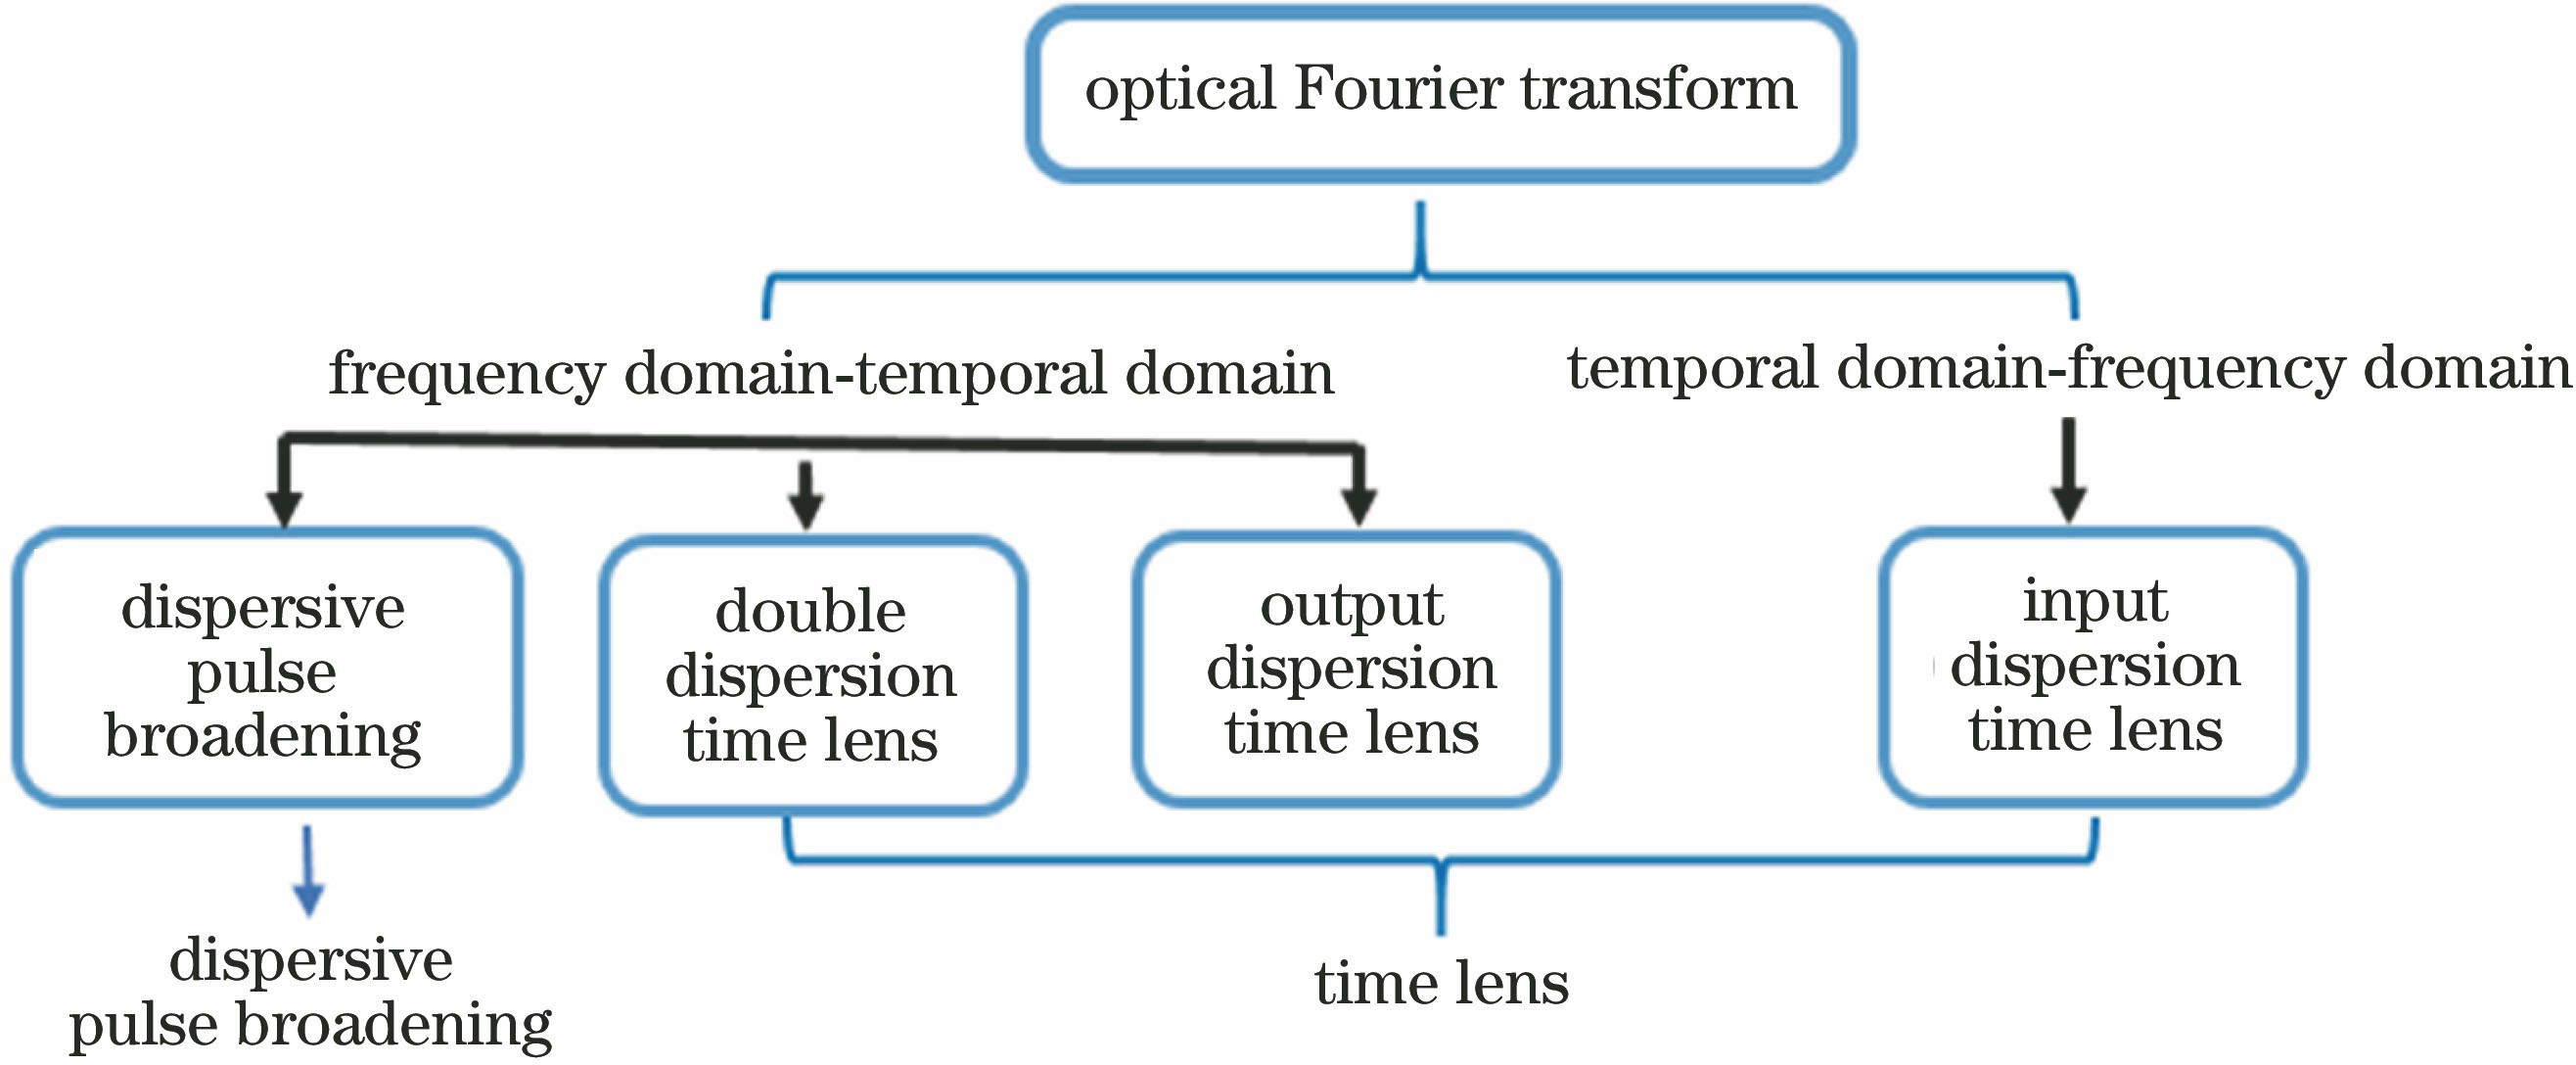 Classification of optical Fourier transform schemes